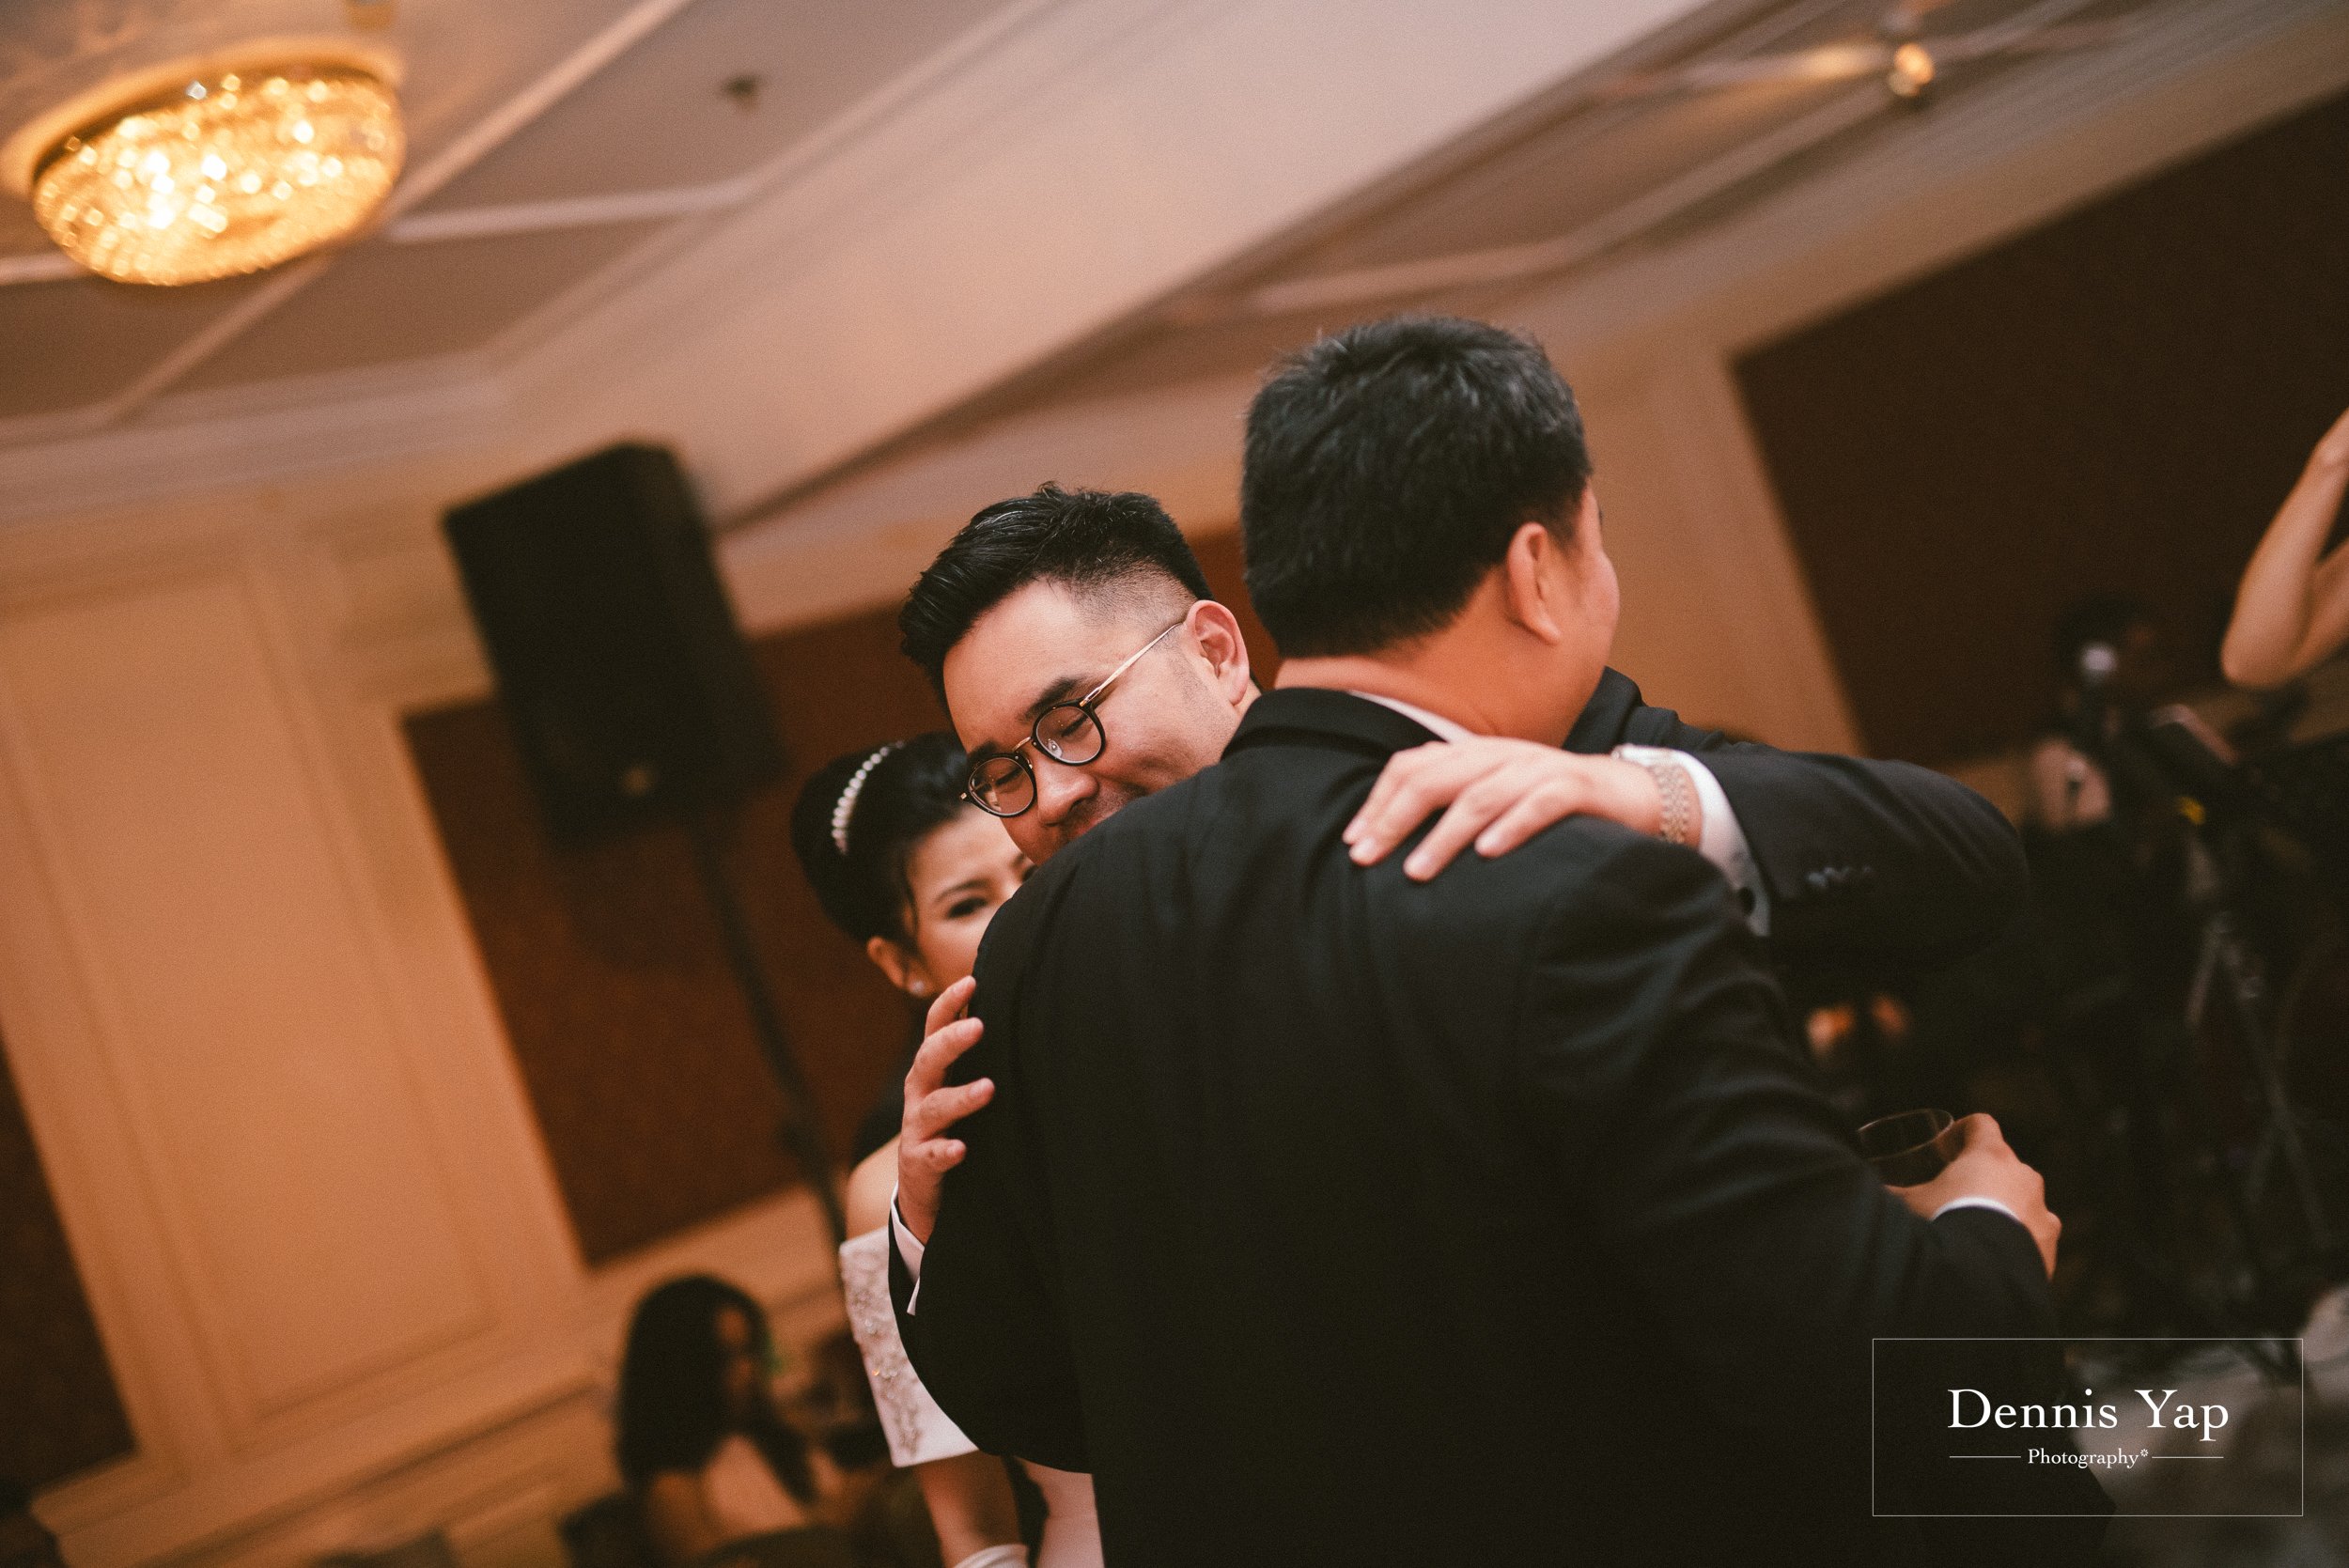 beng seong caring E and O hotel the occasion wedding planner awesome decoration dennis yap photography malaysia top wedding photographer-13.jpg